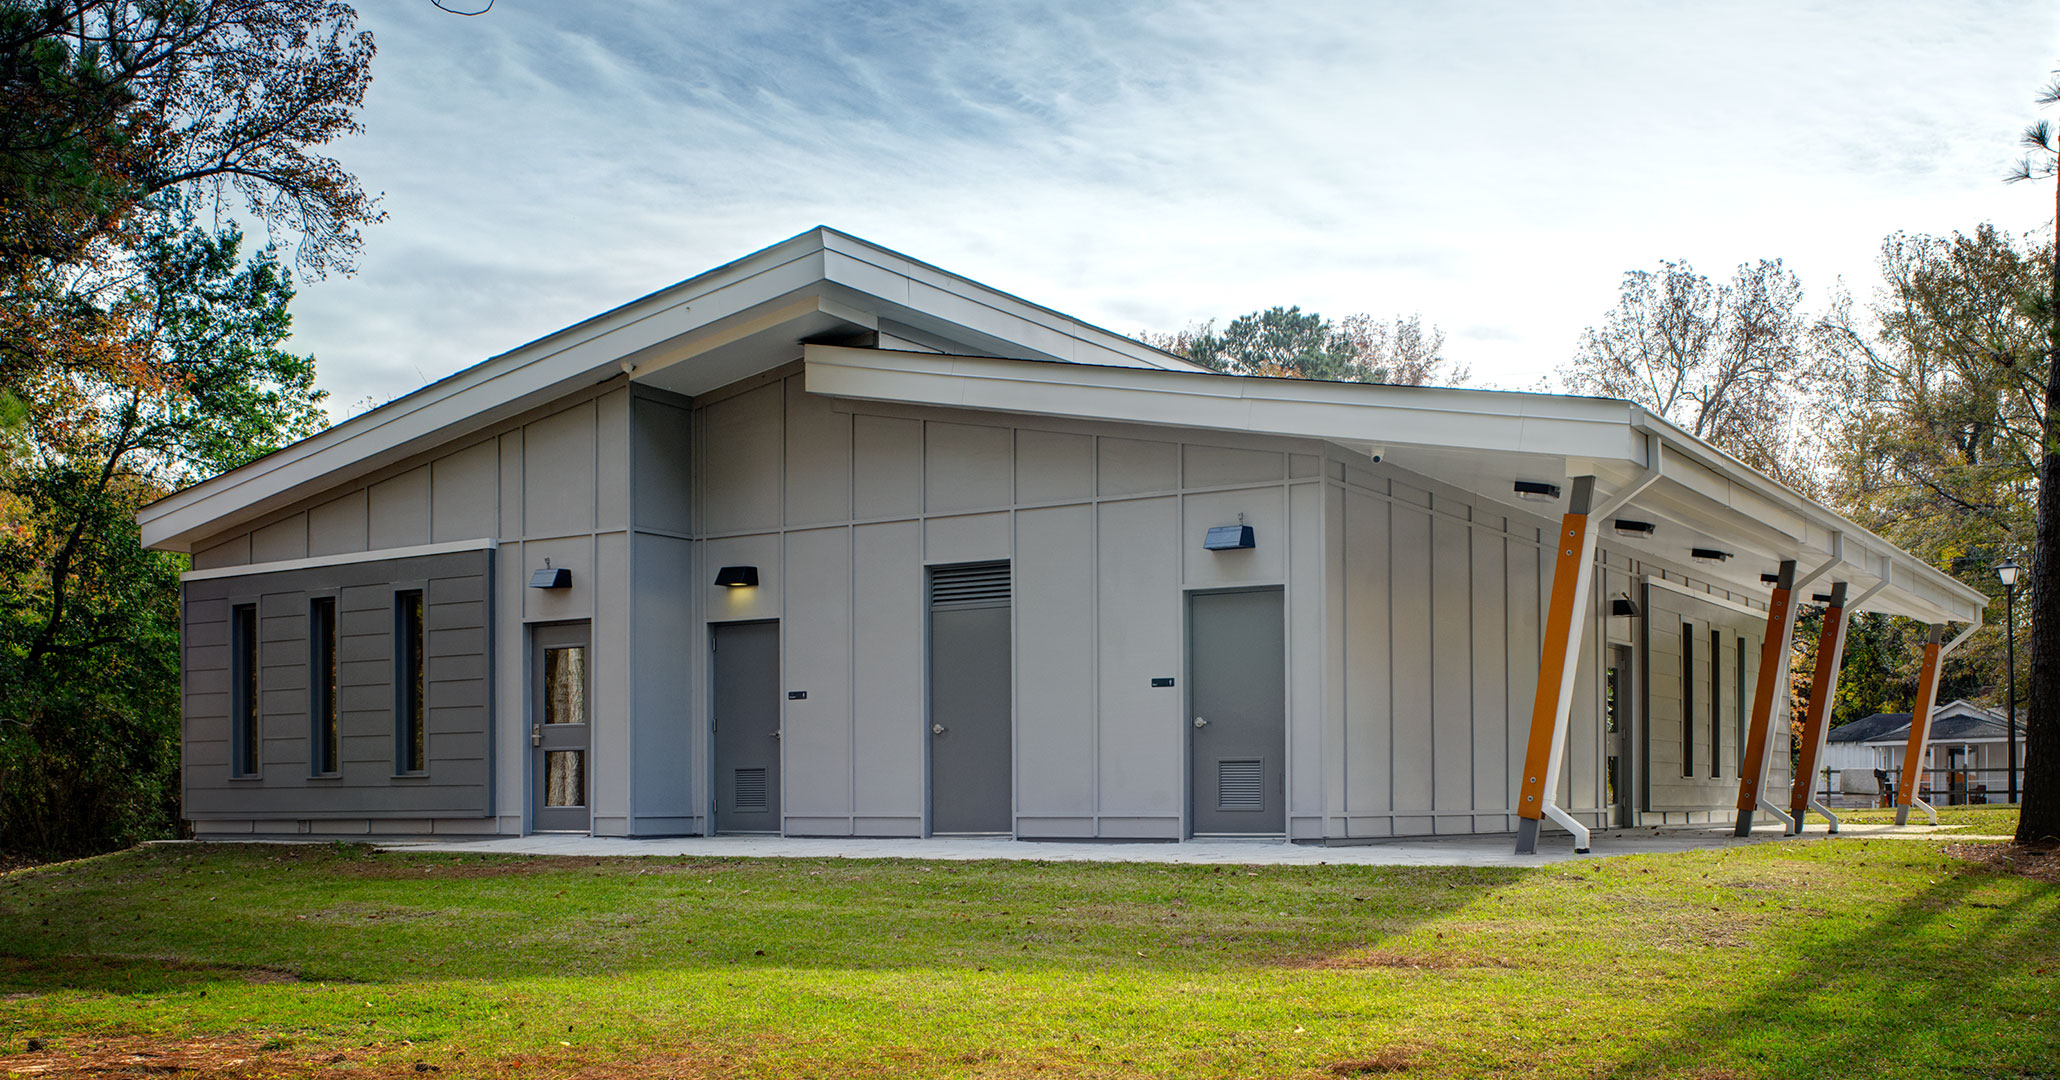 Richland County Recreation worked with the best architects in Columbia, SC to design the Ridgewood Community Center.